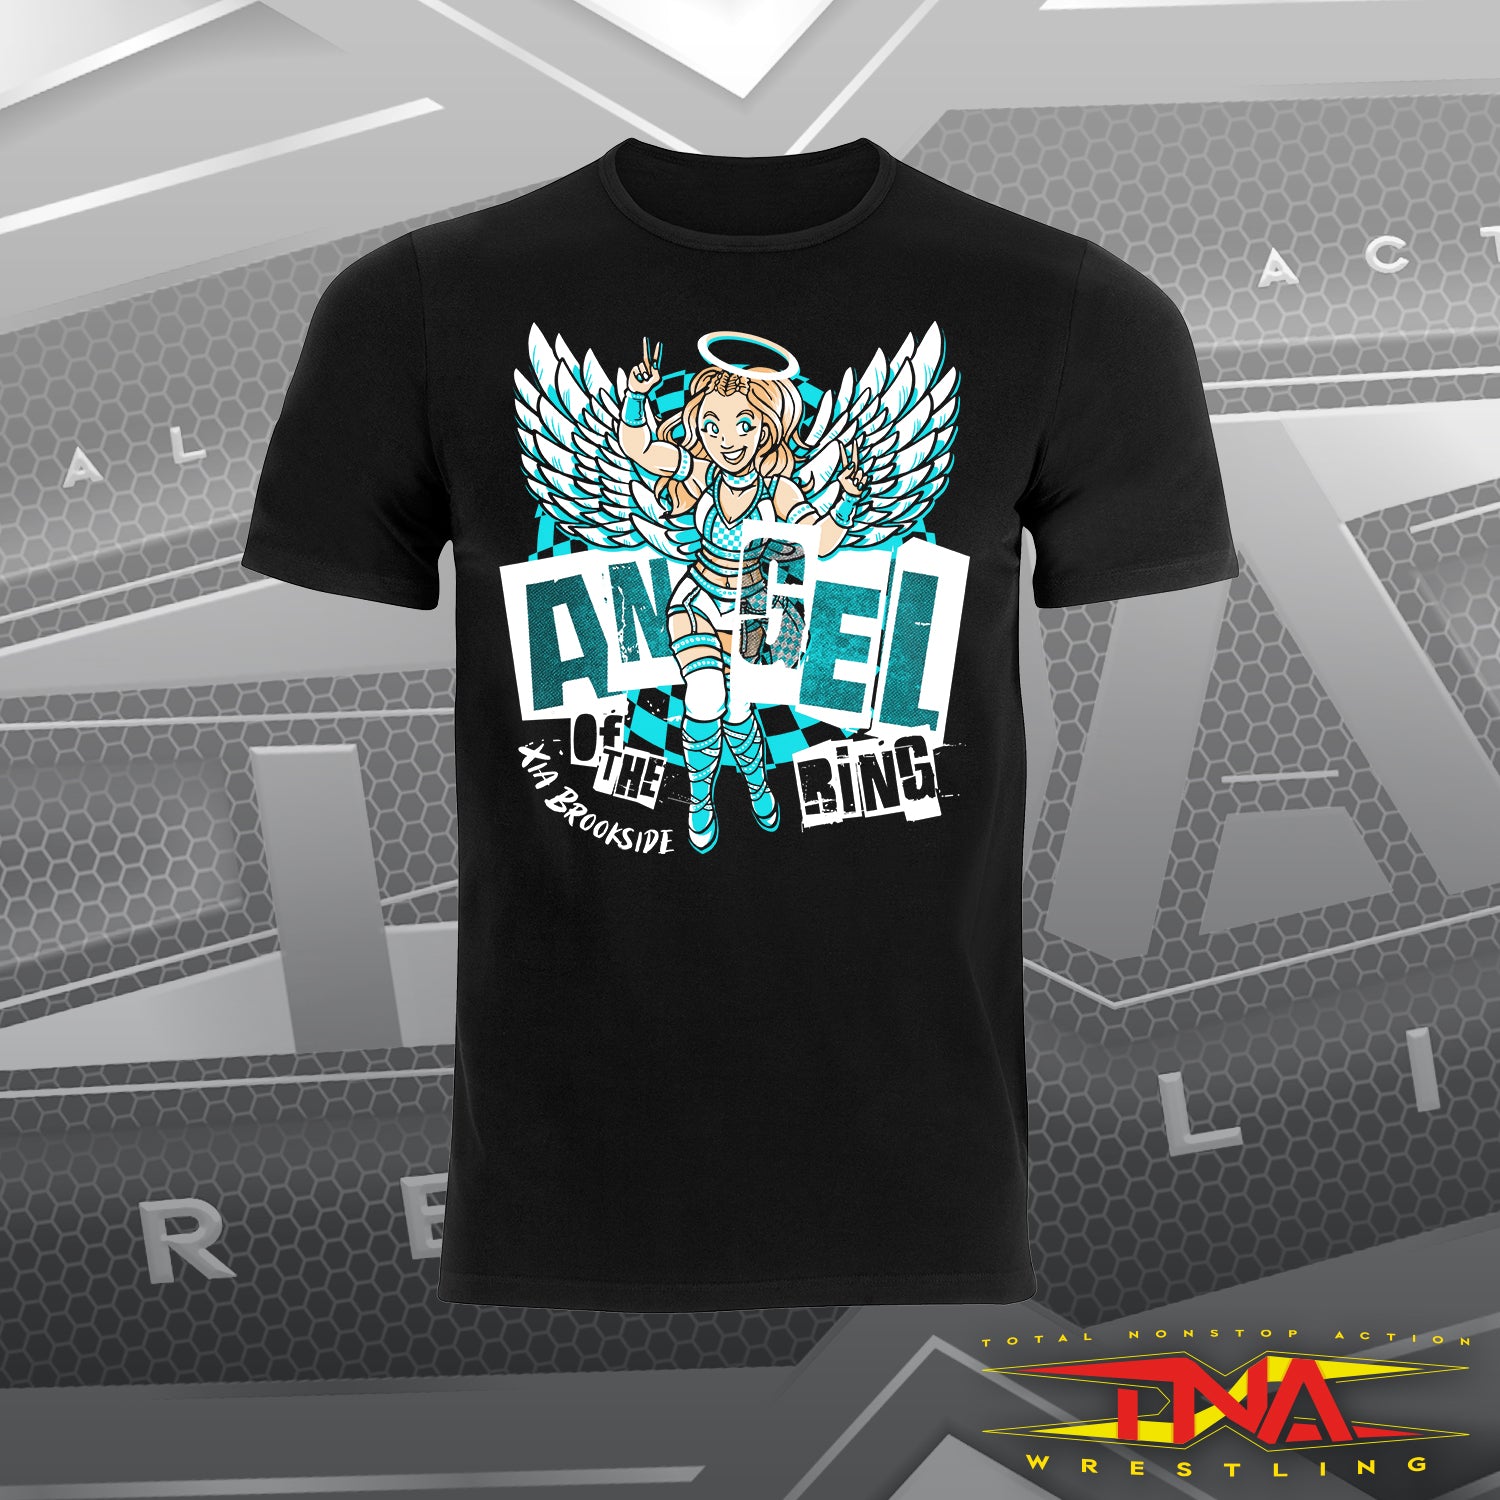 Xia Brookside - Angel of the Ring T-Shirt